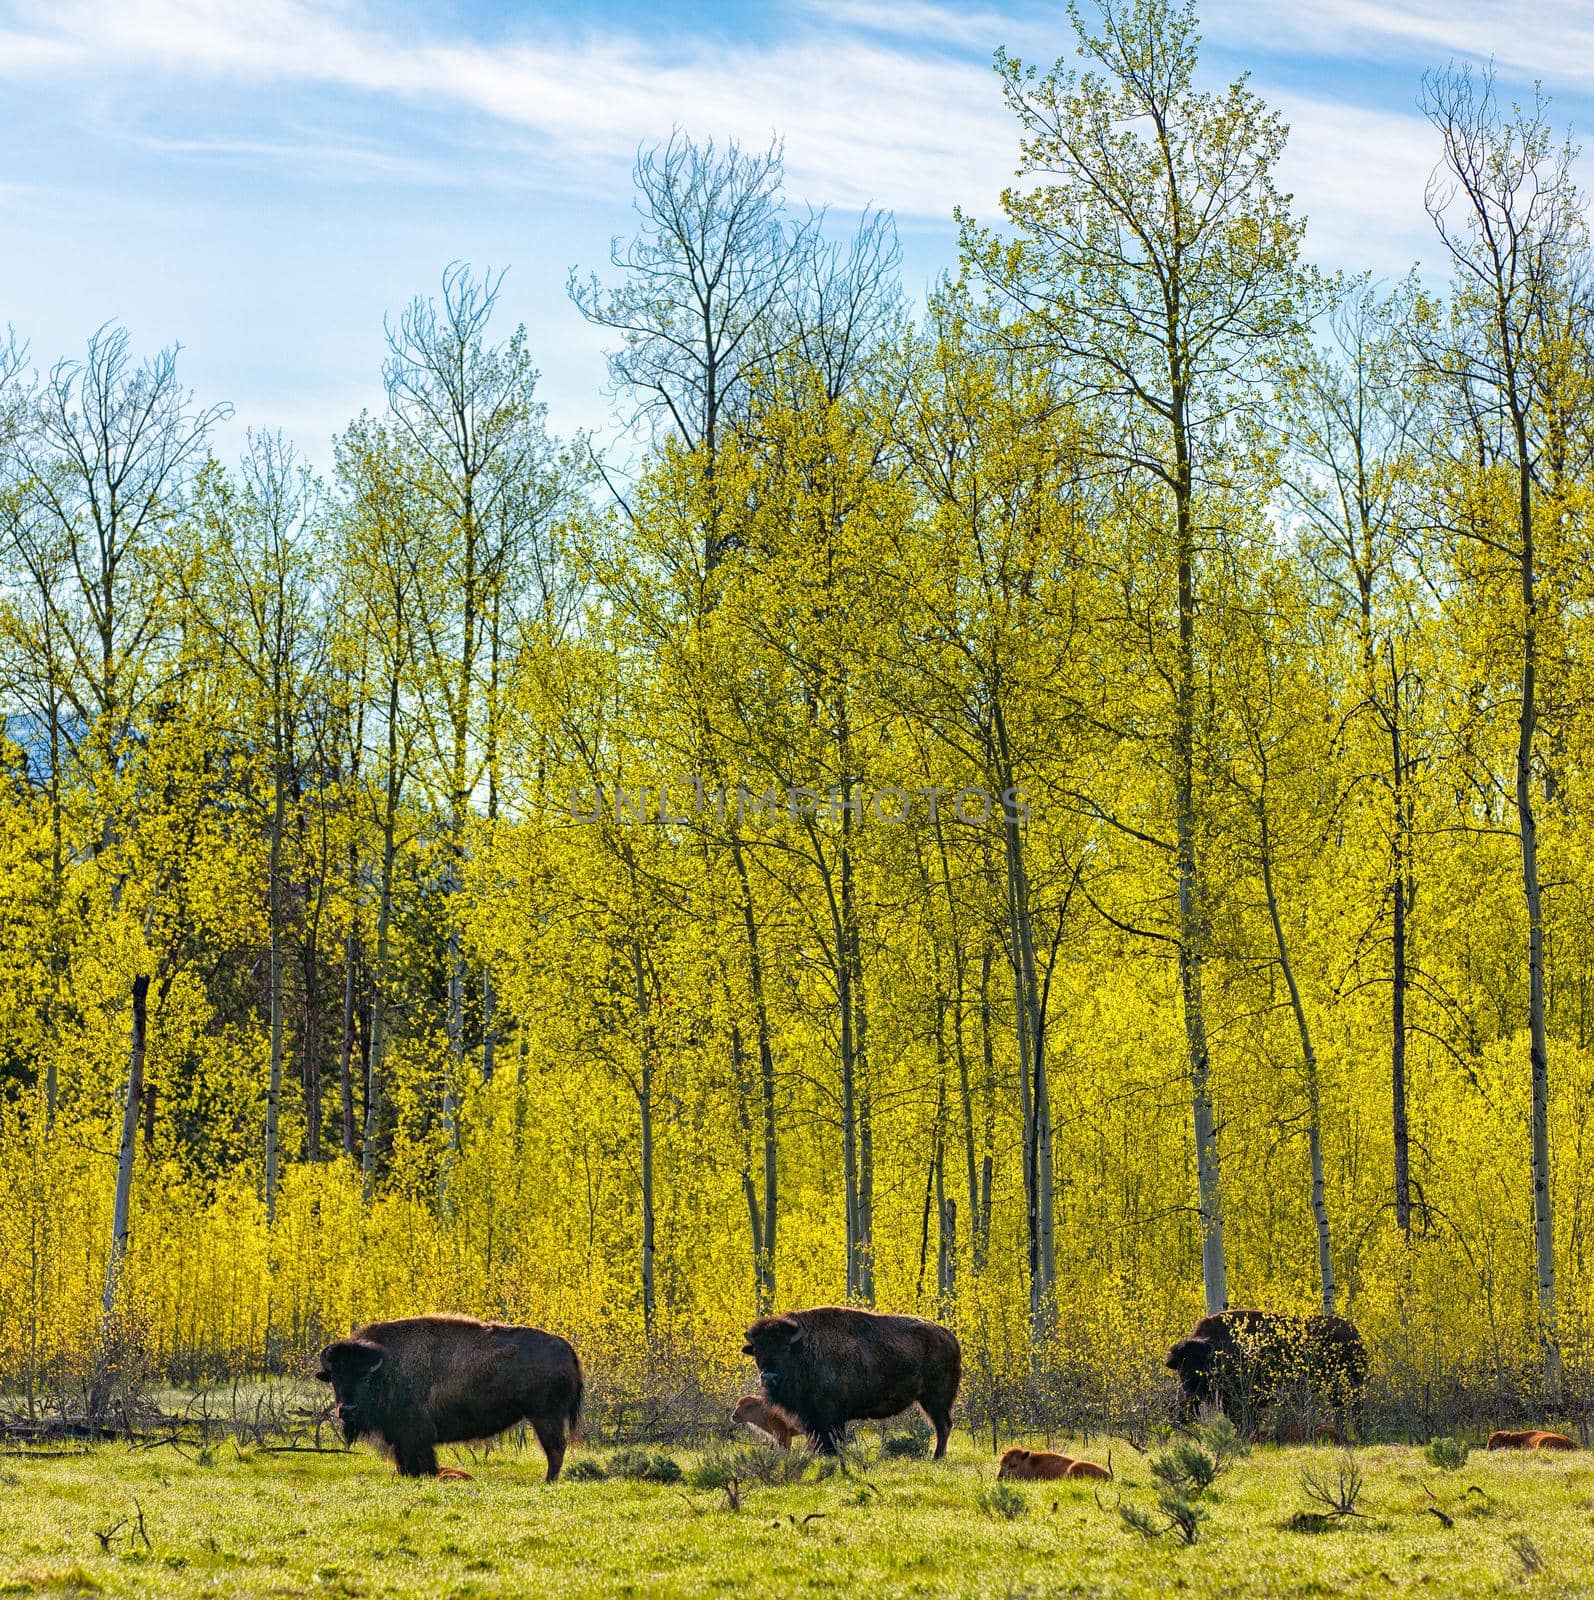 Three buffalo in the forest, Image of Three buffalo in the grass